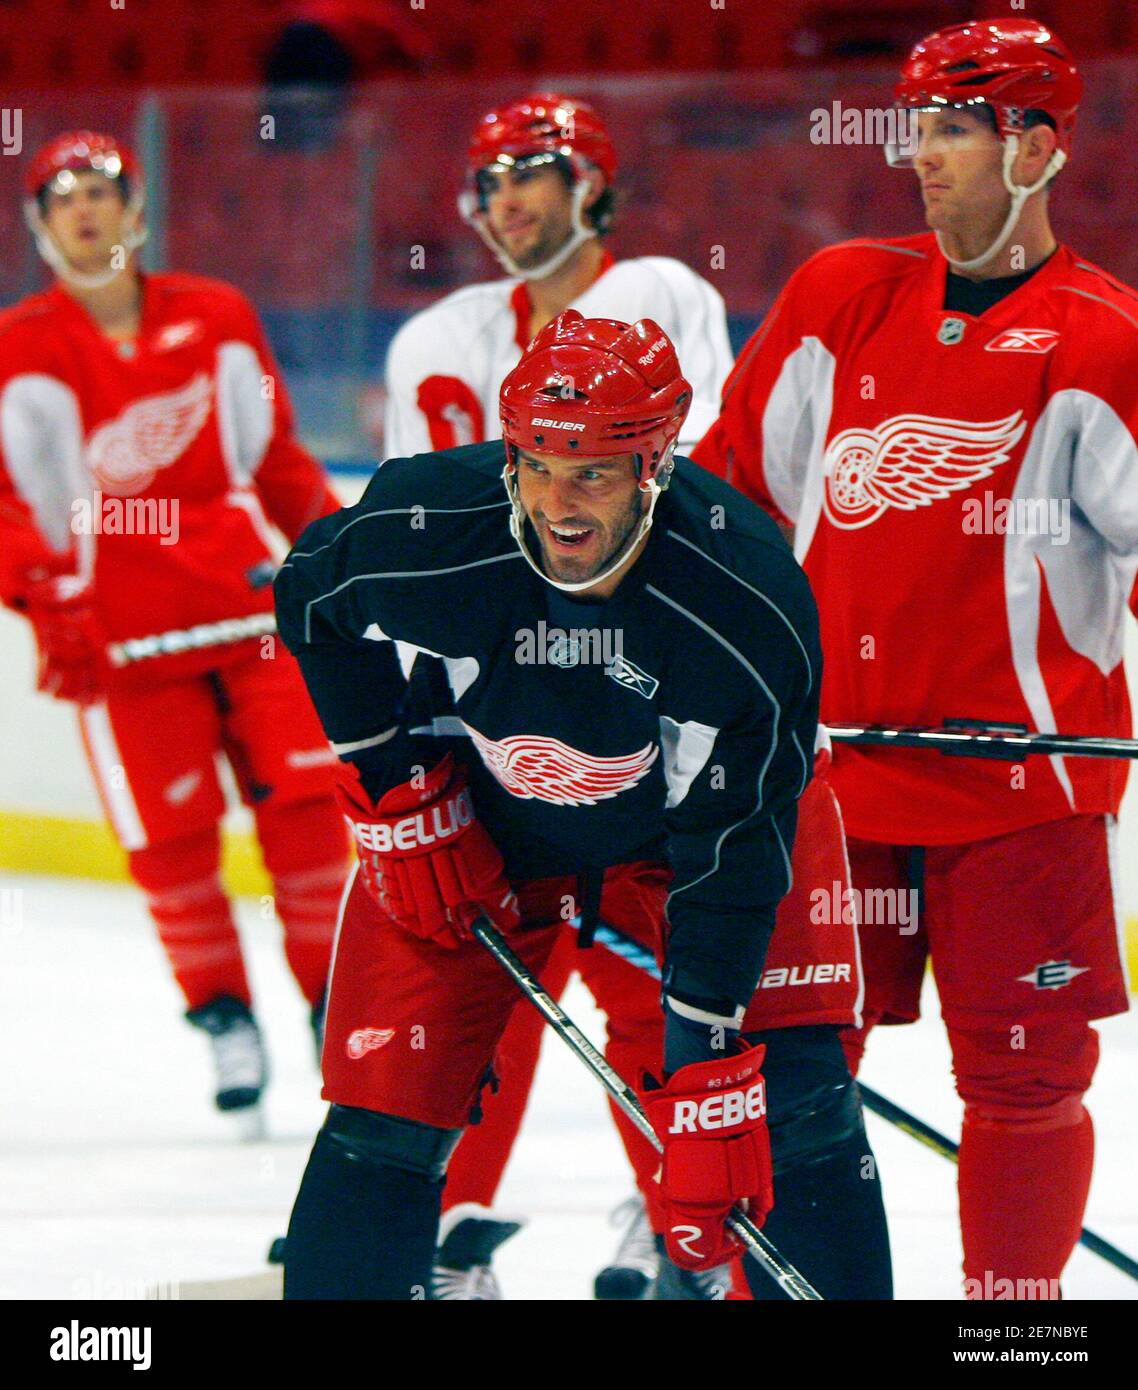 Nicklas Lidstrom of the Detroit Red Wings hockey team takes part in a  practice session in Stockholm September 30, 2009. The Red Wings will play  the St. Louis Blues in the National